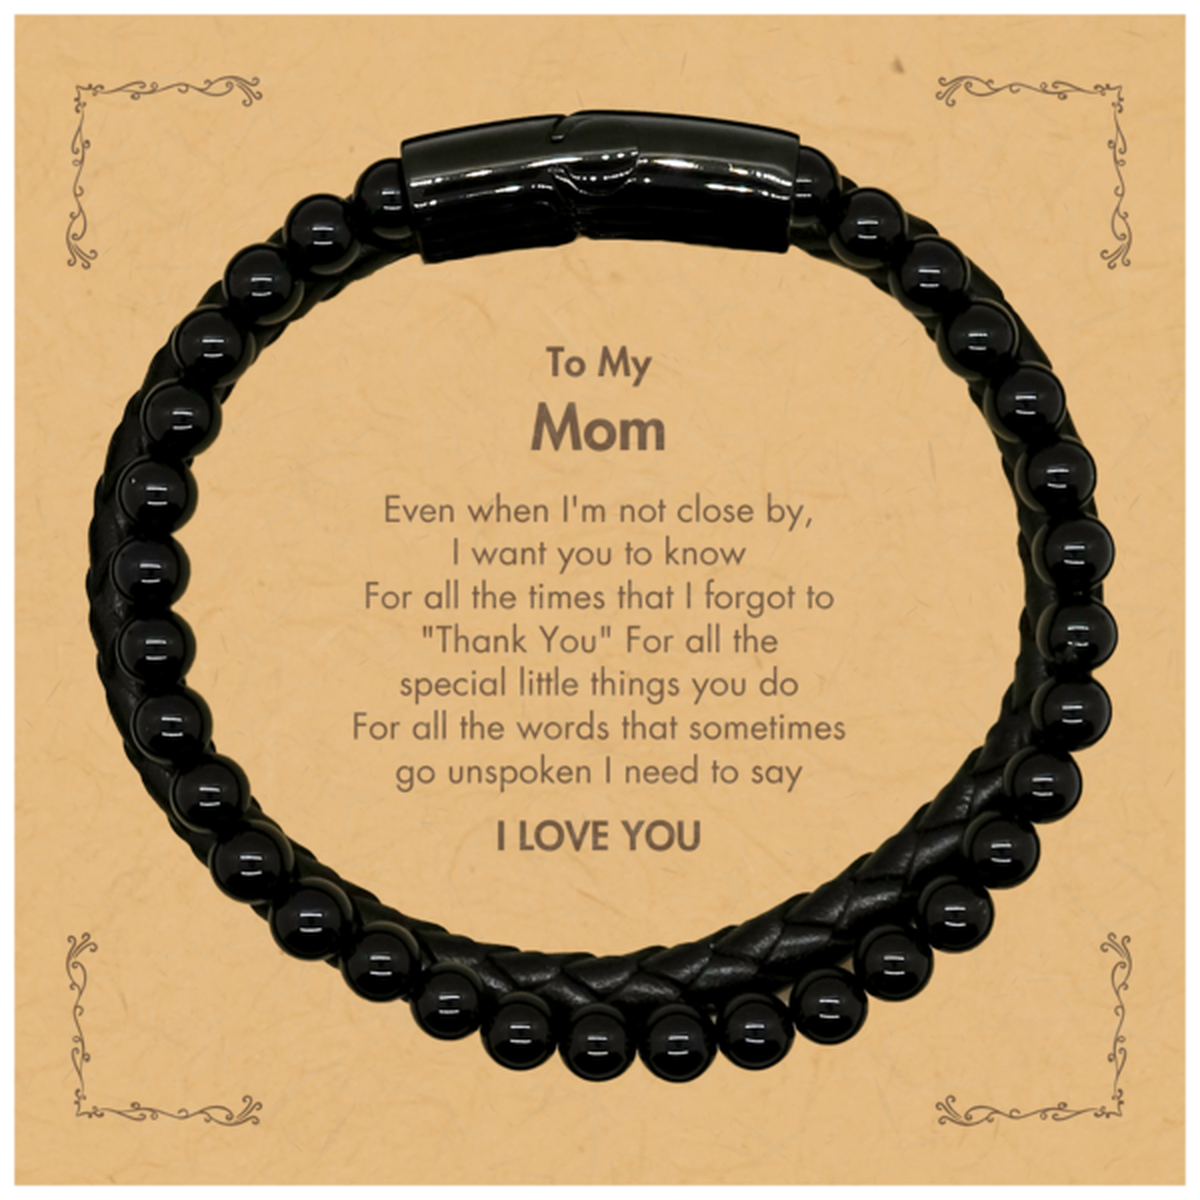 Thank You Gifts for Mom, Keepsake Stone Leather Bracelets Gifts for Mom Birthday Mother's day Father's Day Mom For all the words That sometimes go unspoken I need to say I LOVE YOU